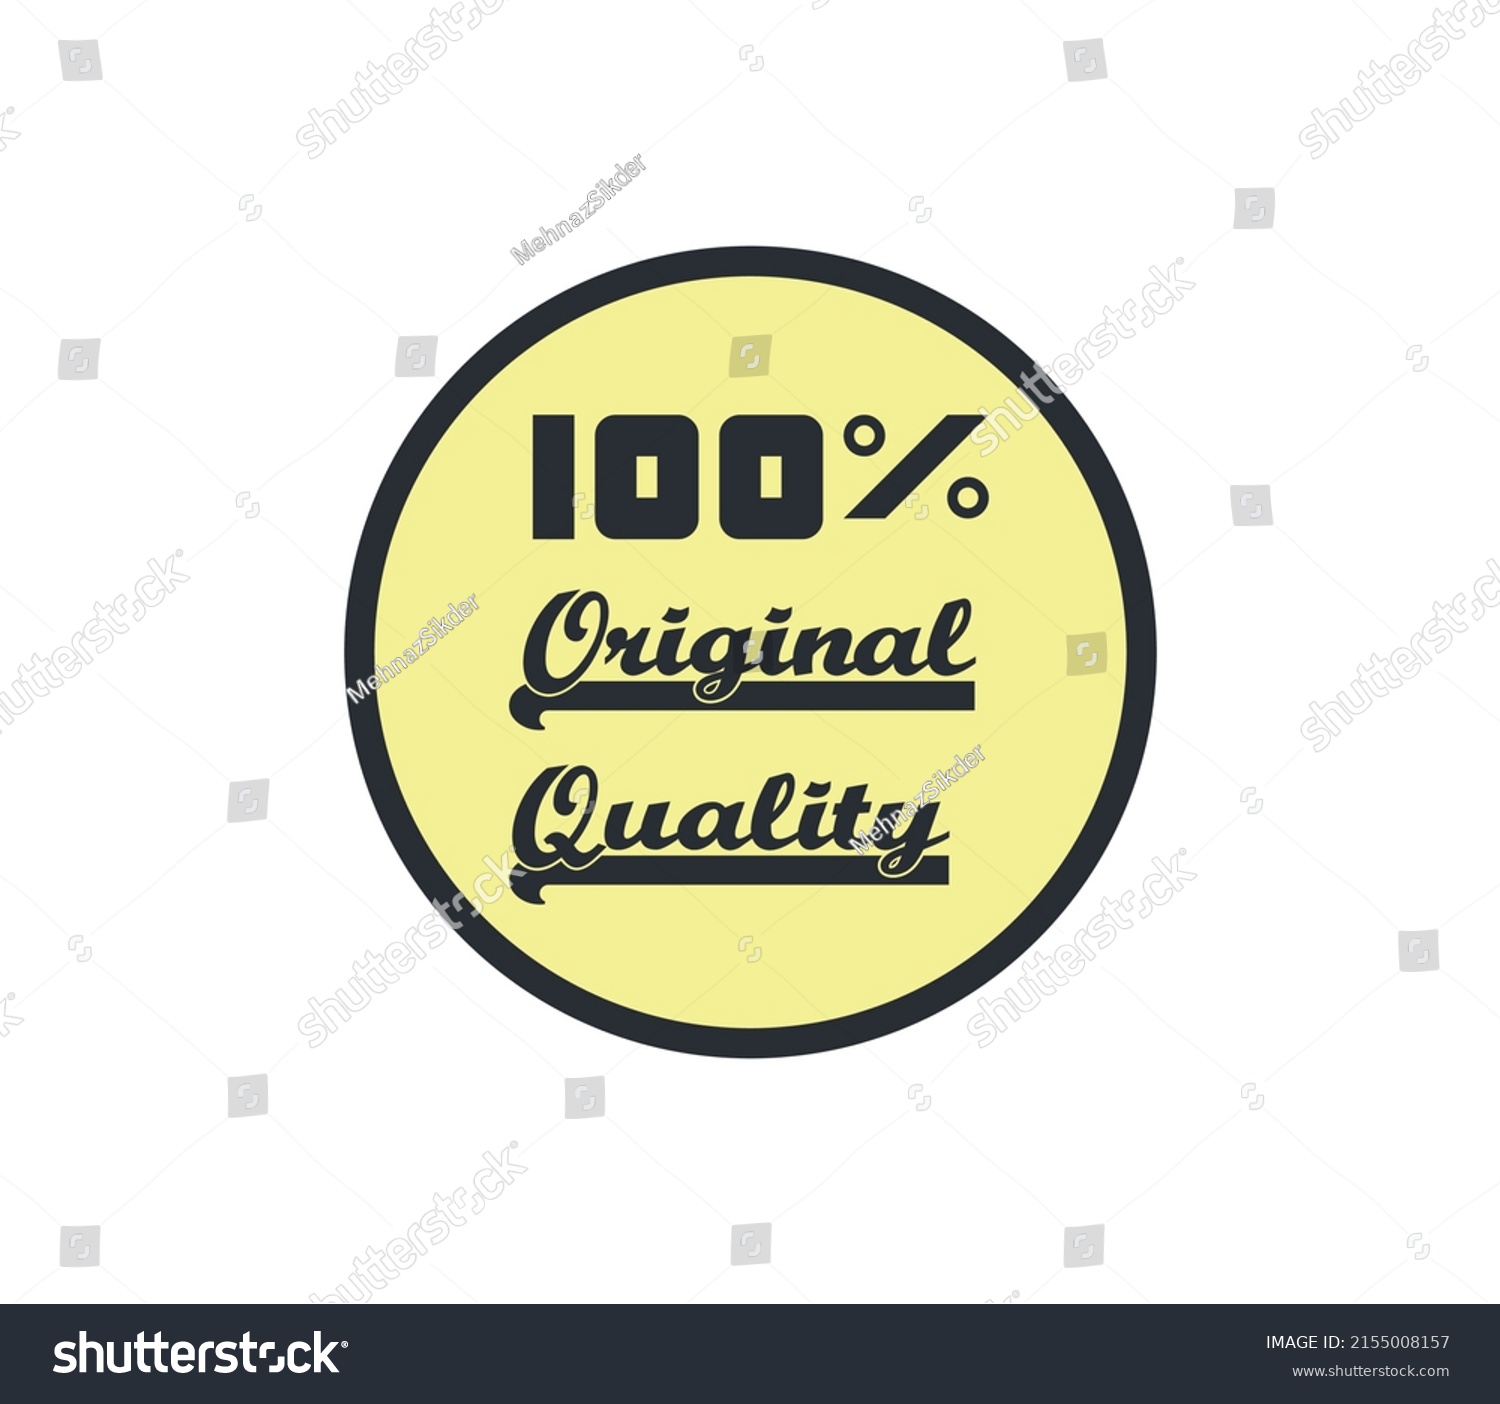 100% percentage original quality circular sign label vector art illustration with fantastic font and yellow background #2155008157